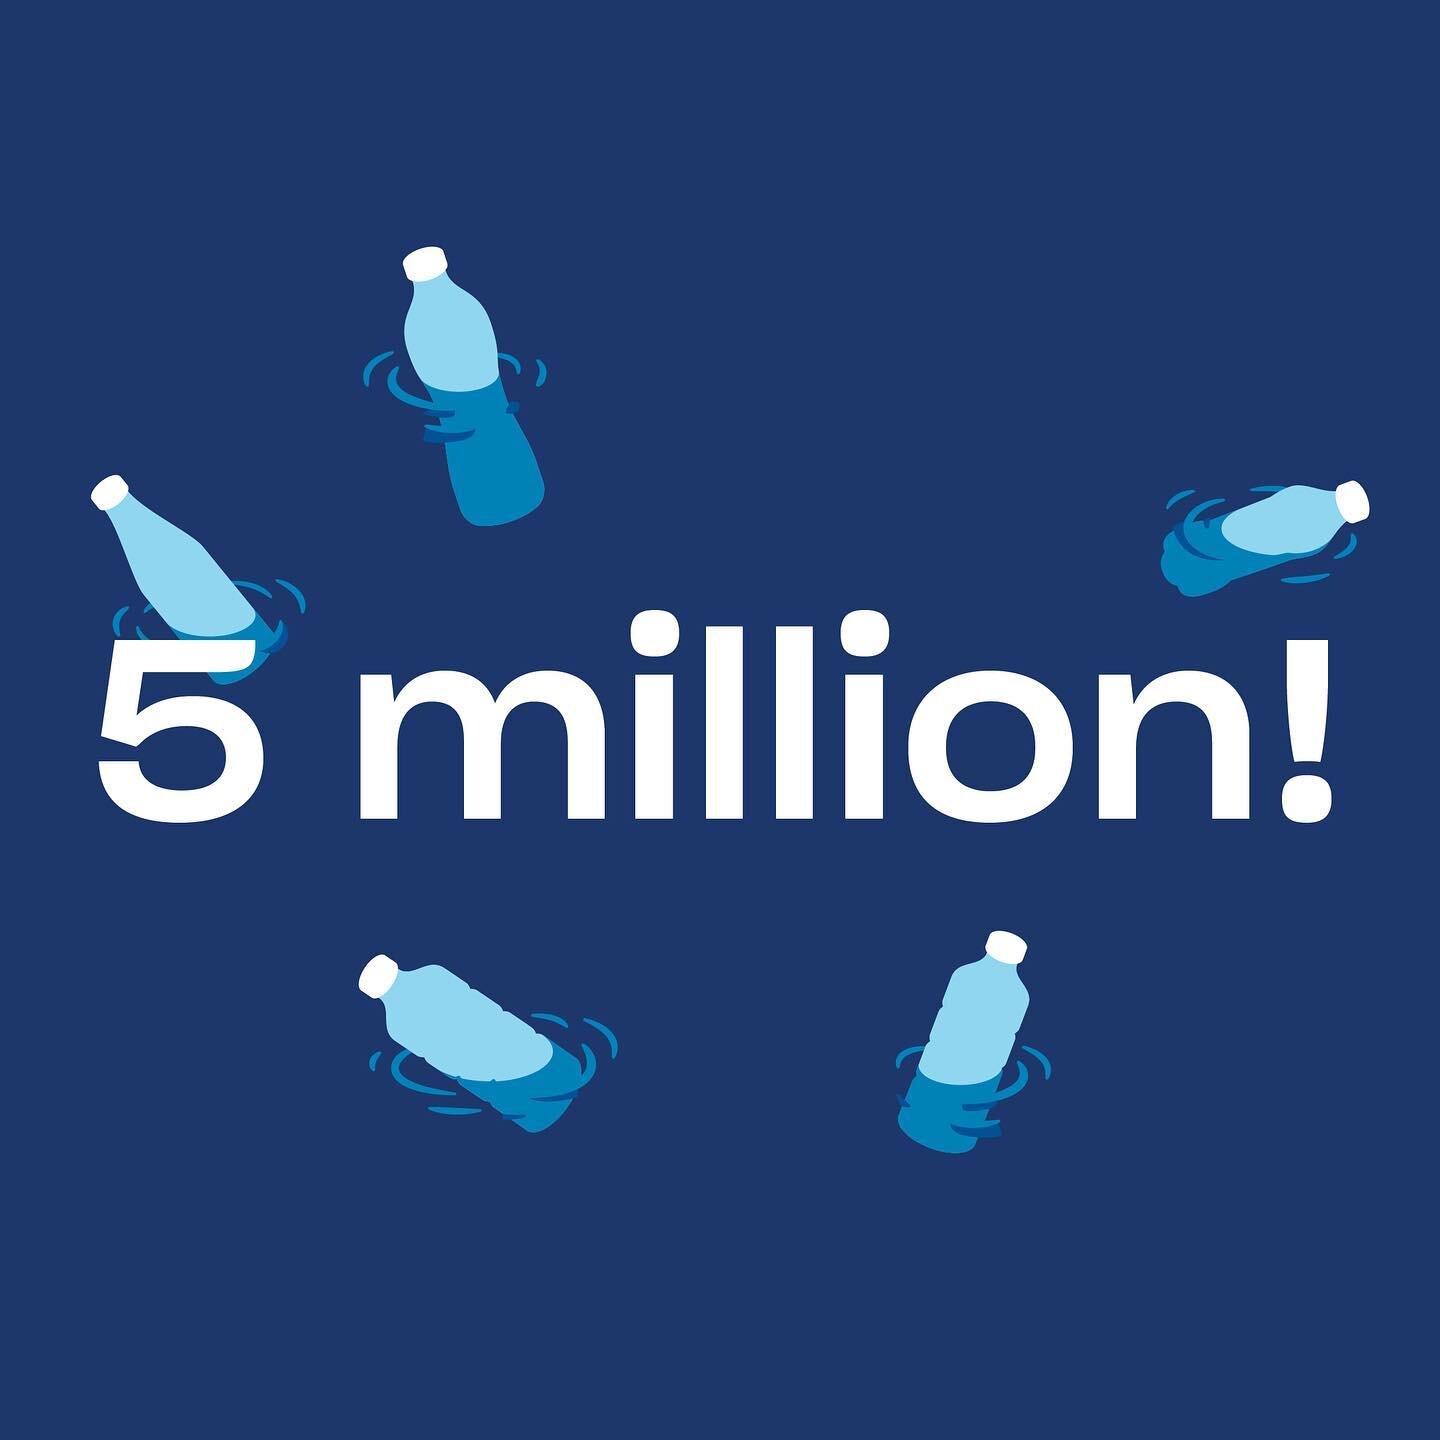 Here we are again, another MILLION plastic bottles prevented; we might have to start announcing every 5 million at this rate 😏